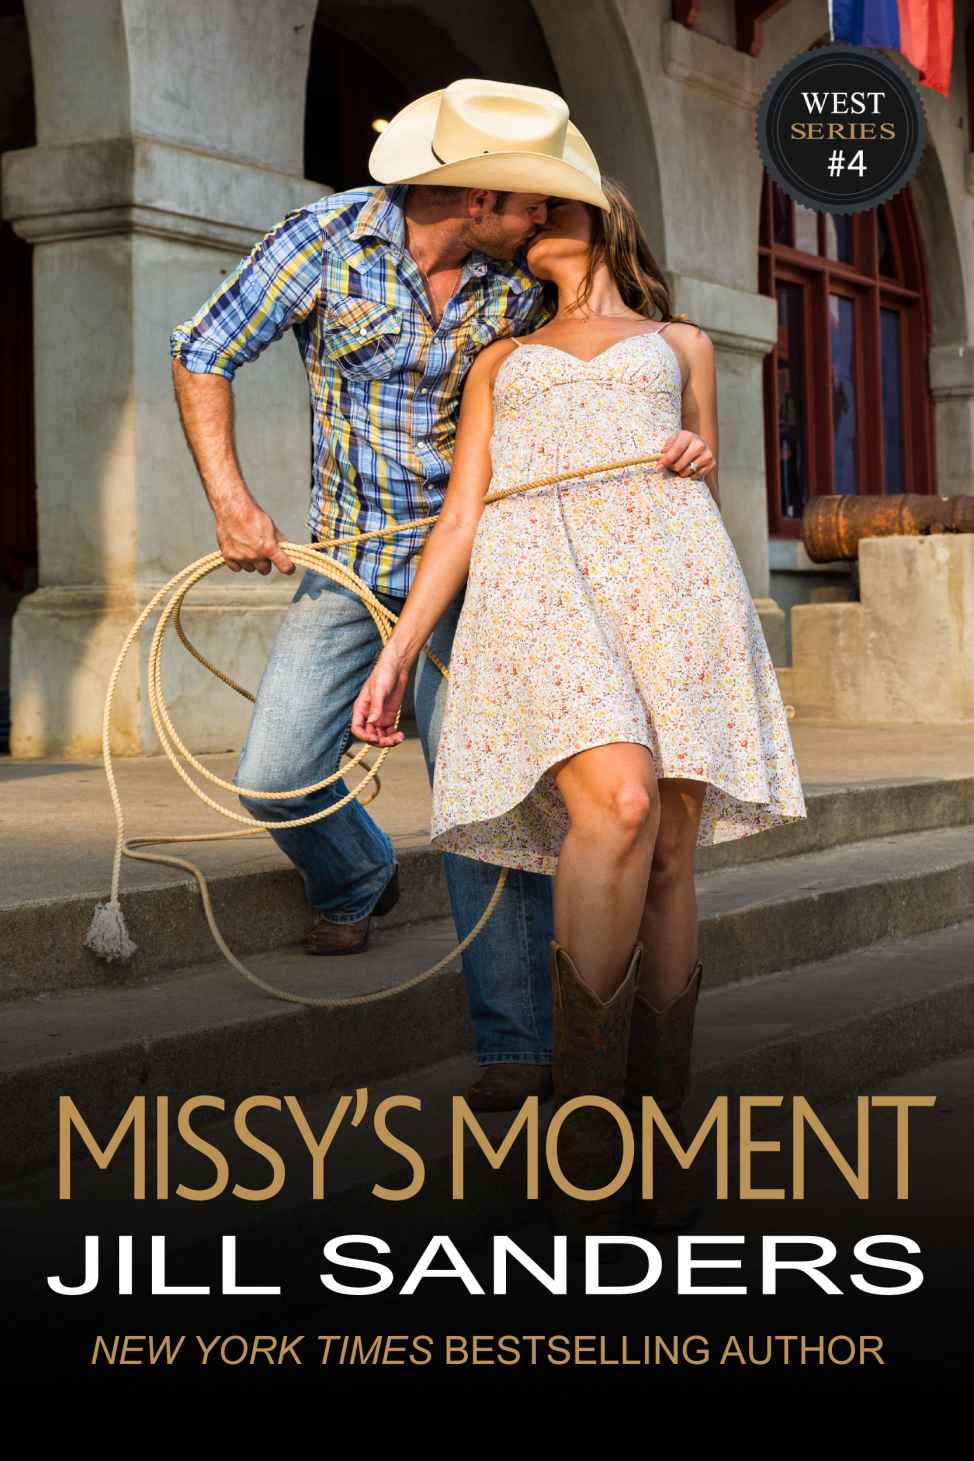 Missy's Moment (The West Series Book 4) by Jill Sanders